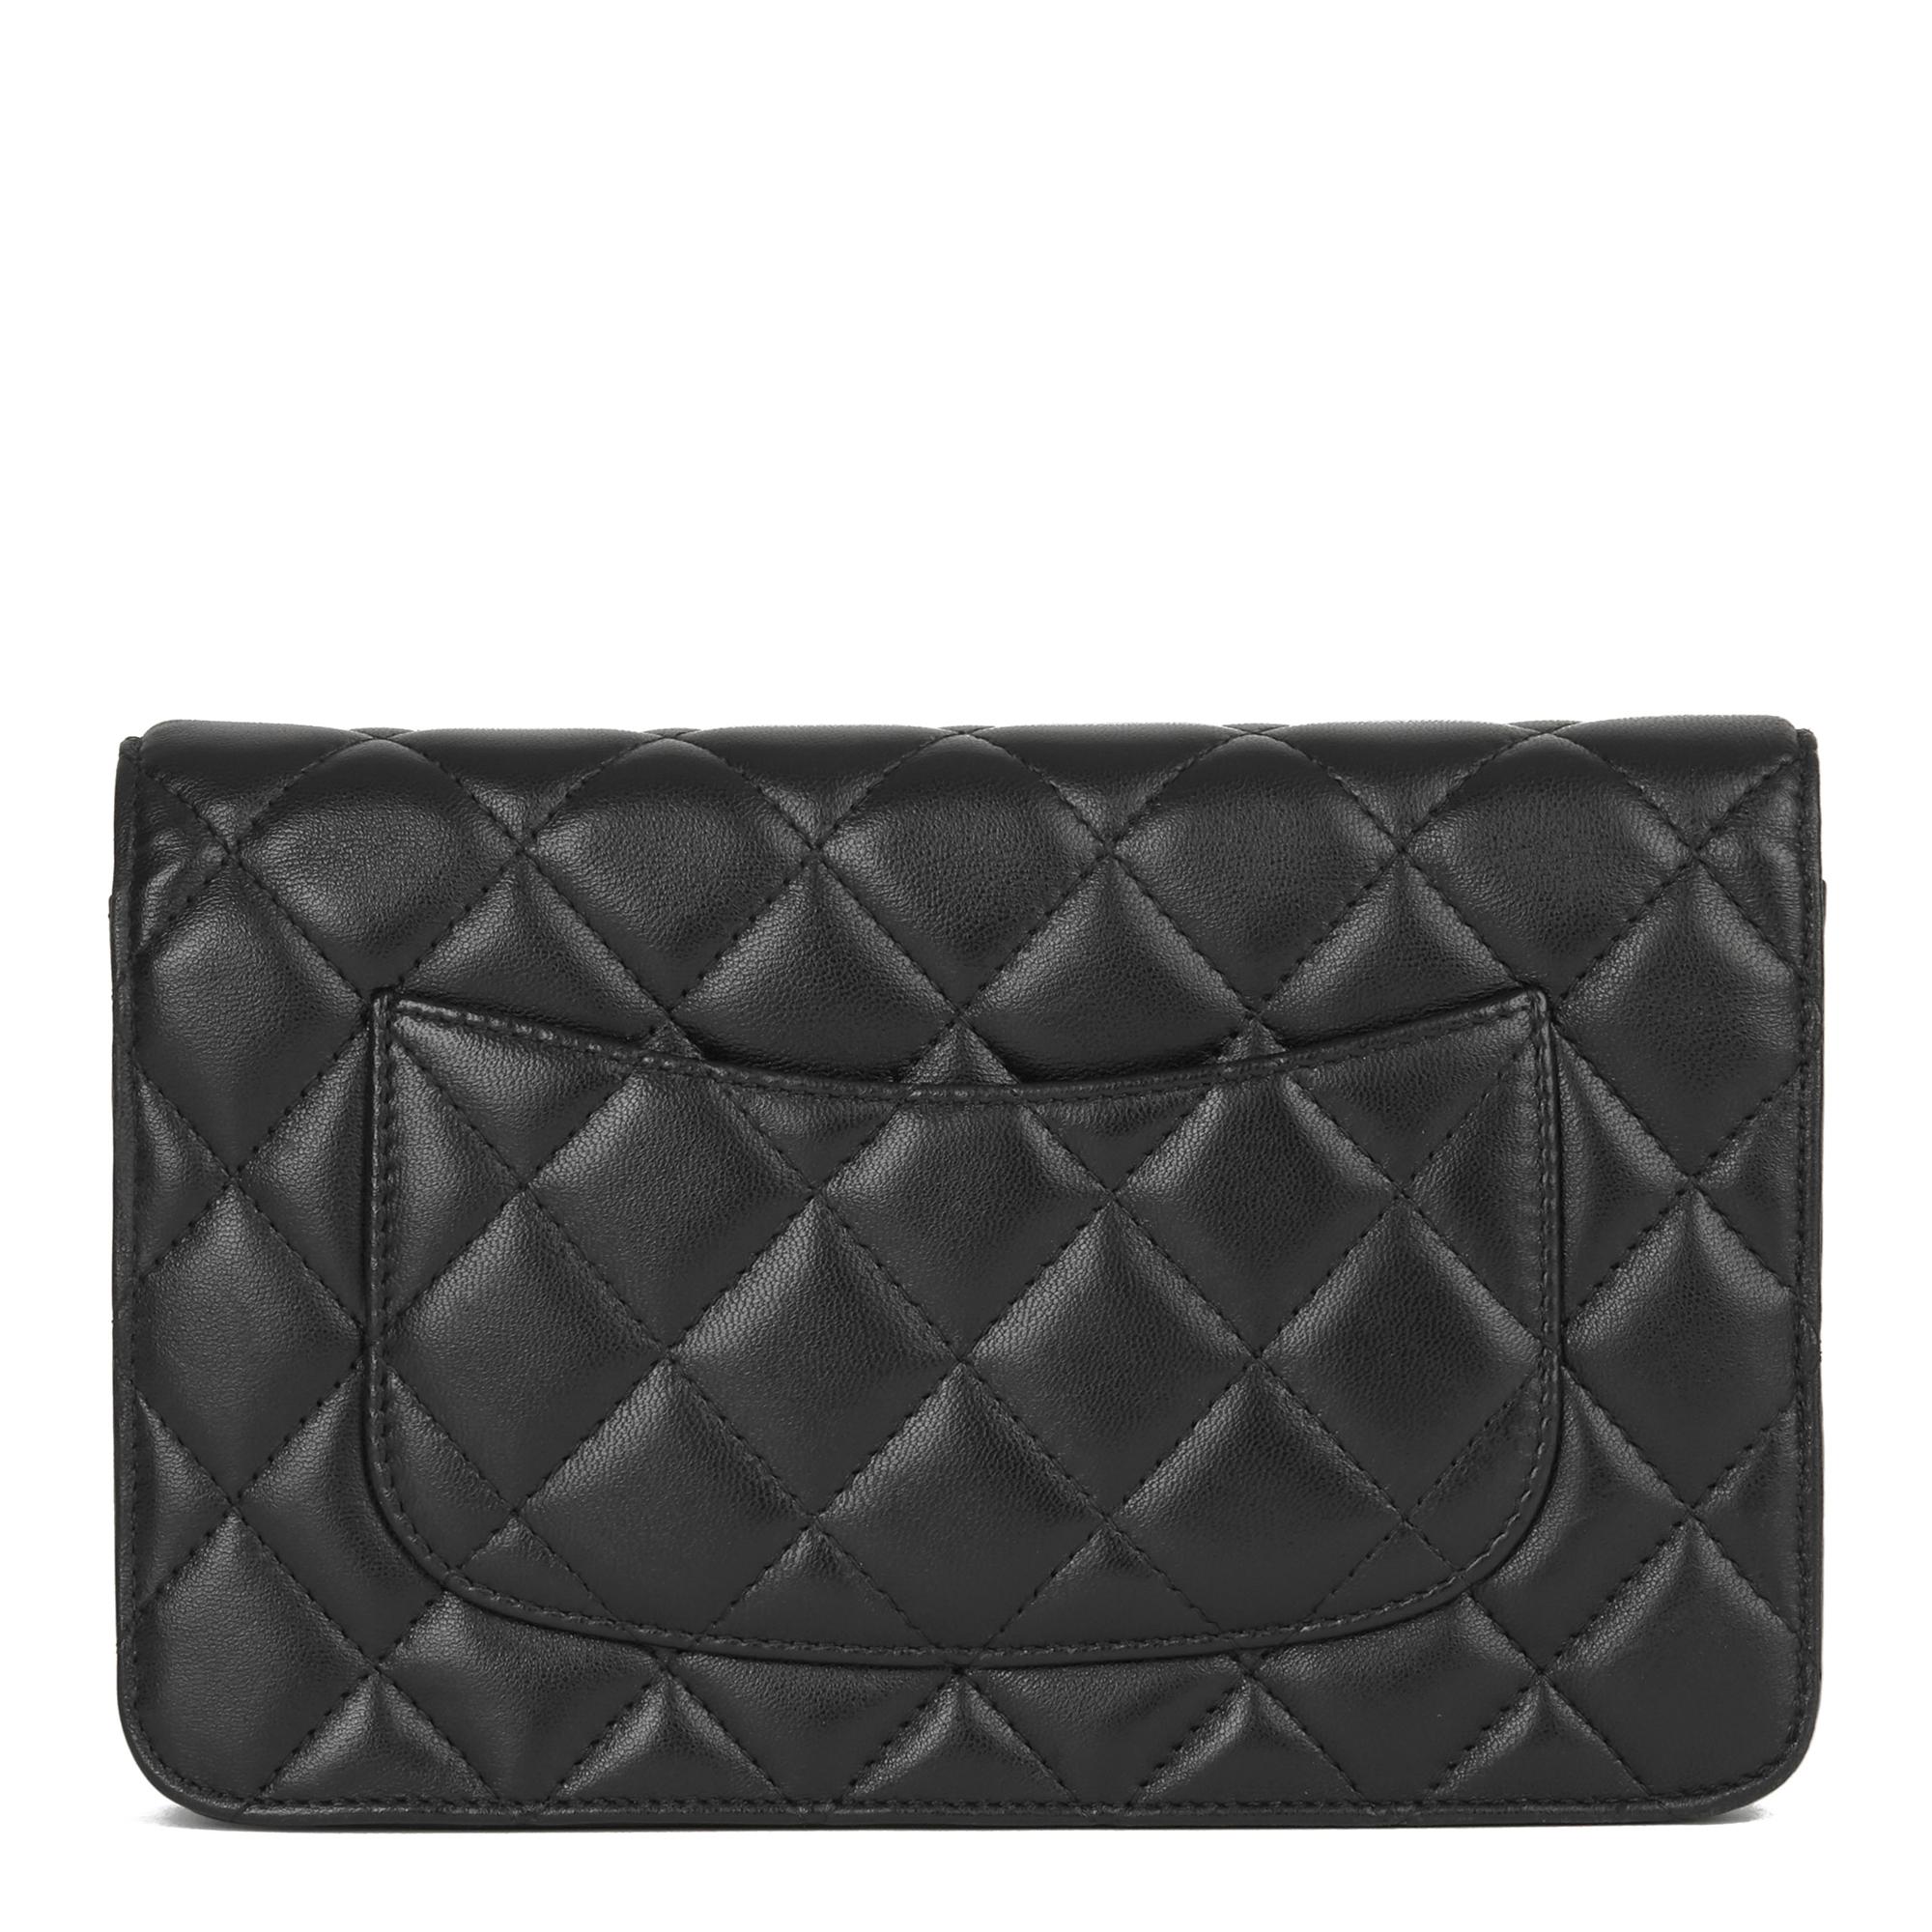 2011 Chanel Black Quilted Lambskin Wallet-on-Chain WOC 1